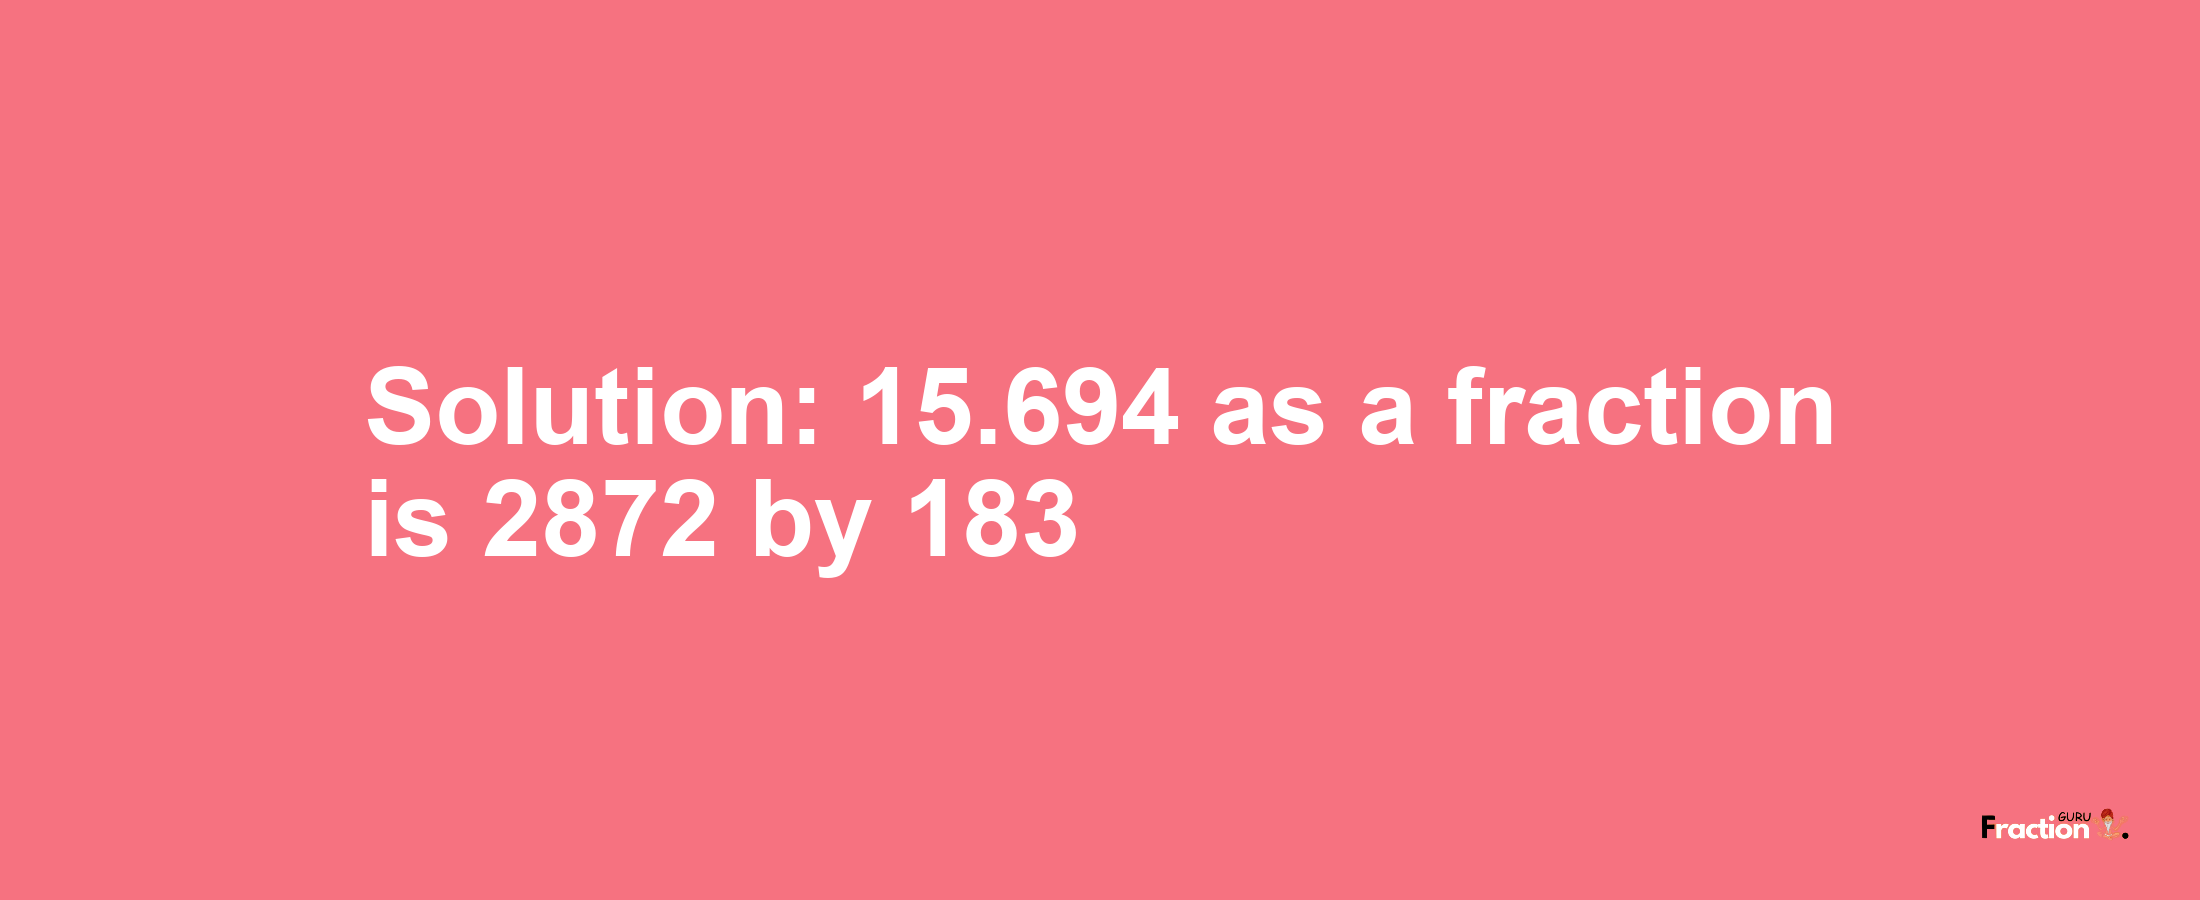 Solution:15.694 as a fraction is 2872/183